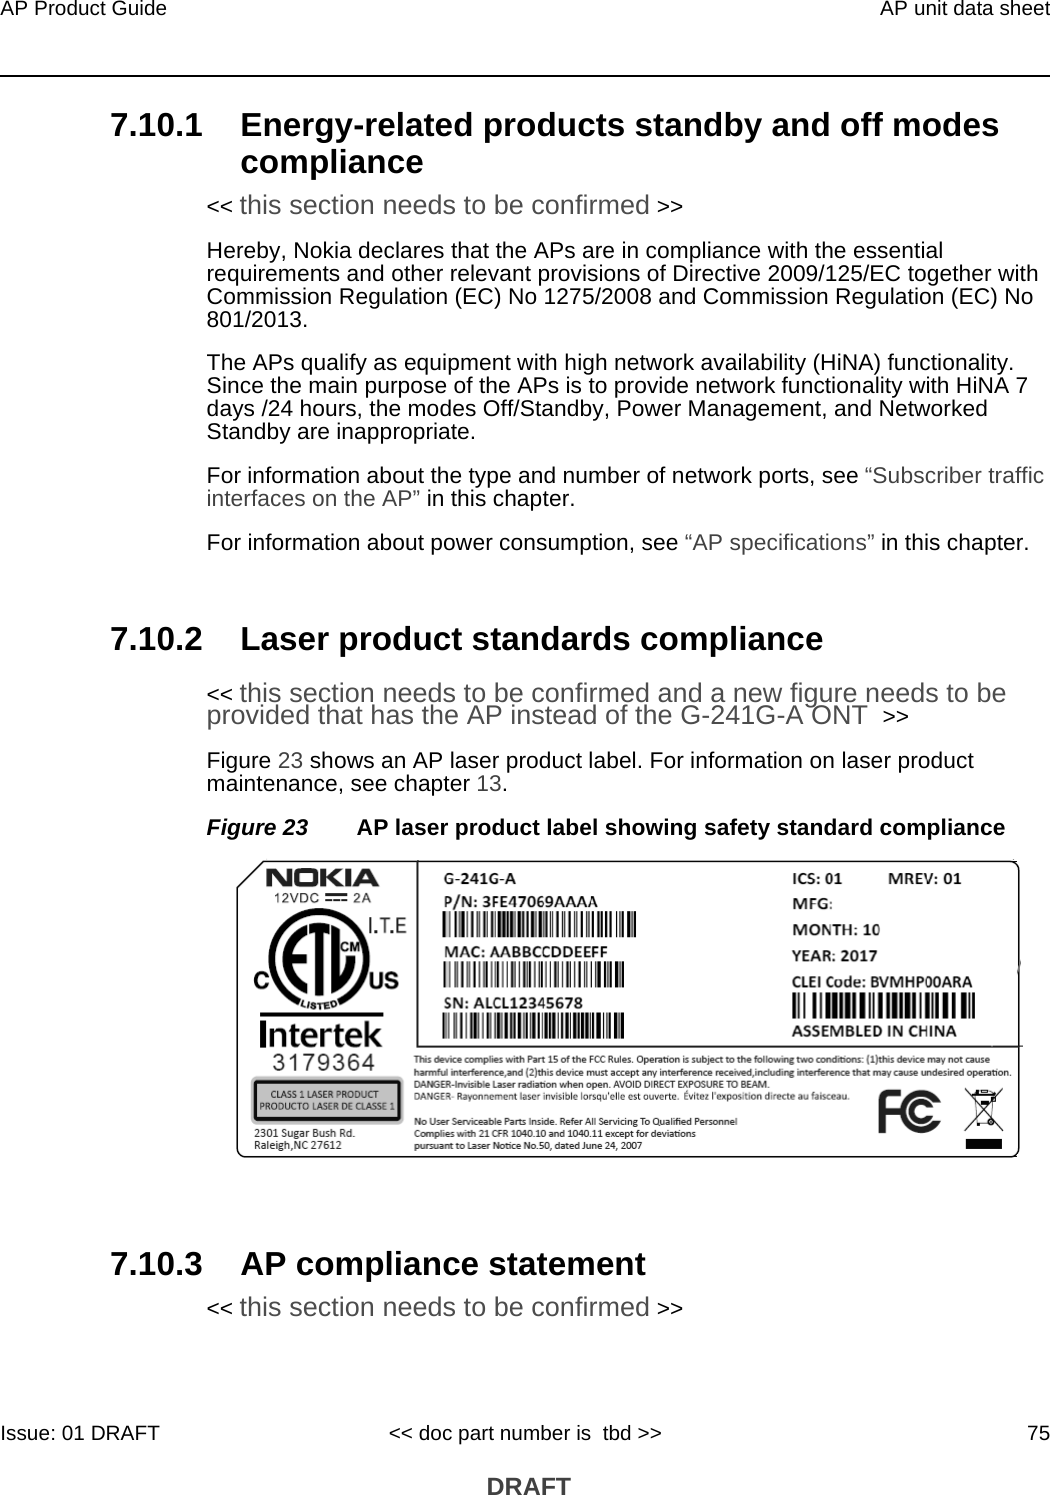 AP Product Guide AP unit data sheetIssue: 01 DRAFT &lt;&lt; doc part number is  tbd &gt;&gt; 75 DRAFT7.10.1 Energy-related products standby and off modes compliance&lt;&lt; this section needs to be confirmed &gt;&gt;Hereby, Nokia declares that the APs are in compliance with the essential requirements and other relevant provisions of Directive 2009/125/EC together with Commission Regulation (EC) No 1275/2008 and Commission Regulation (EC) No 801/2013. The APs qualify as equipment with high network availability (HiNA) functionality. Since the main purpose of the APs is to provide network functionality with HiNA 7 days /24 hours, the modes Off/Standby, Power Management, and Networked Standby are inappropriate.For information about the type and number of network ports, see “Subscriber traffic interfaces on the AP” in this chapter.For information about power consumption, see “AP specifications” in this chapter.7.10.2 Laser product standards compliance&lt;&lt; this section needs to be confirmed and a new figure needs to be provided that has the AP instead of the G-241G-A ONT  &gt;&gt;Figure 23 shows an AP laser product label. For information on laser product maintenance, see chapter 13.Figure 23 AP laser product label showing safety standard compliance7.10.3 AP compliance statement&lt;&lt; this section needs to be confirmed &gt;&gt;